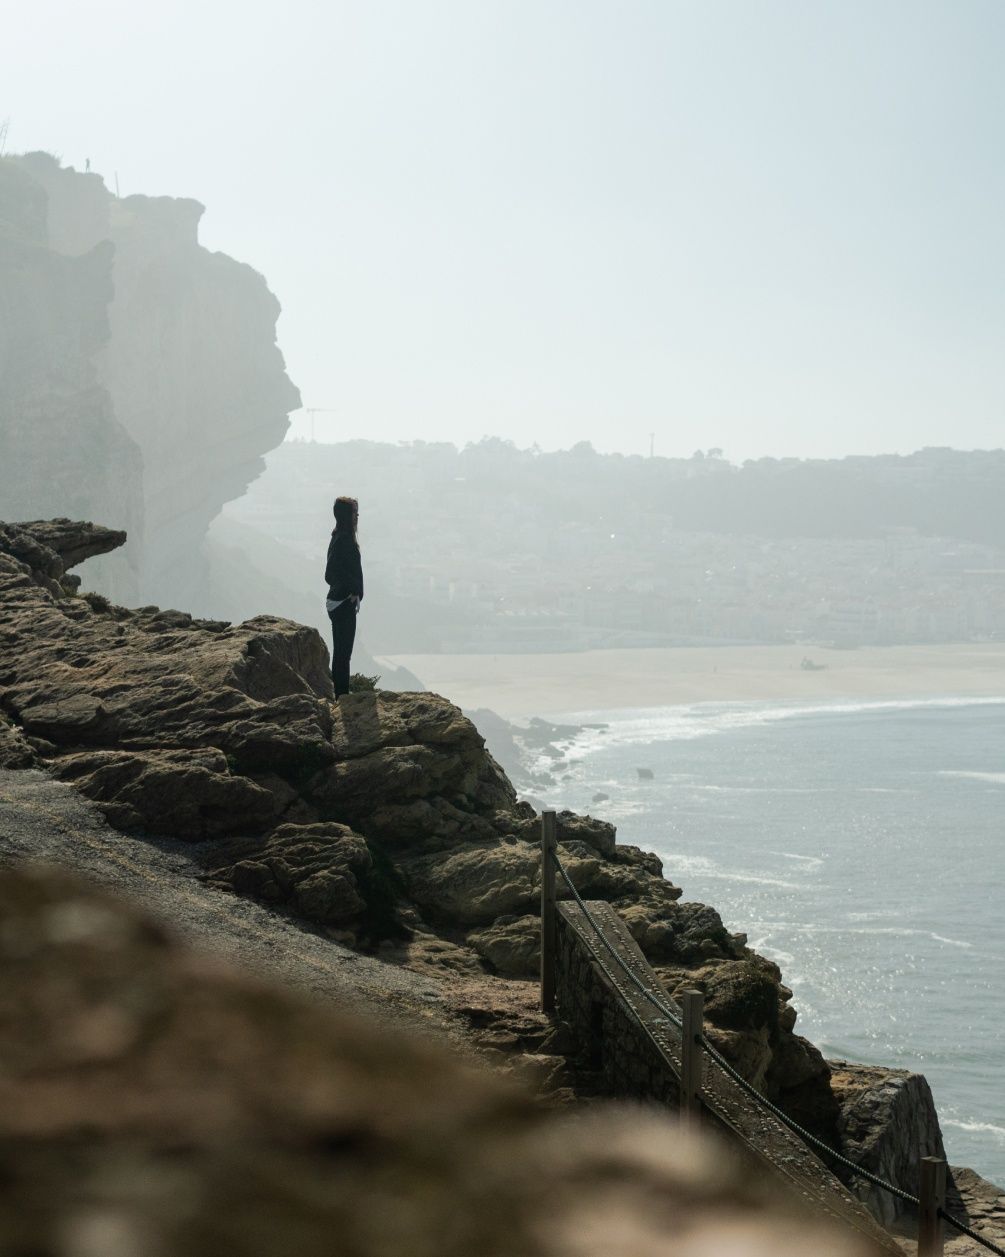 Maria Kuzma stands on the edge of a cliff while looking out into the sea.